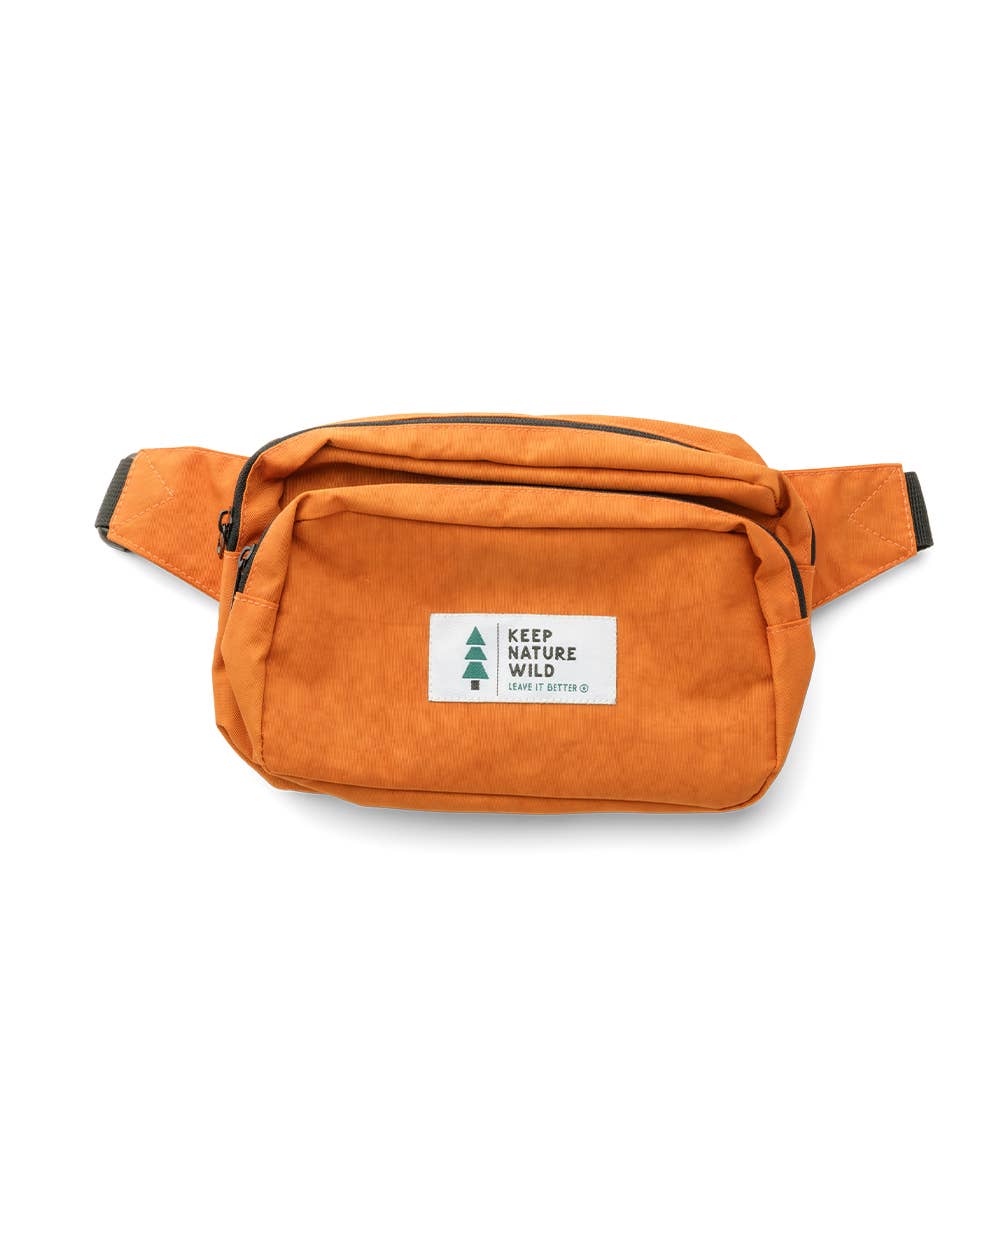 Orange Fanny Pack by Keep Nature Wild